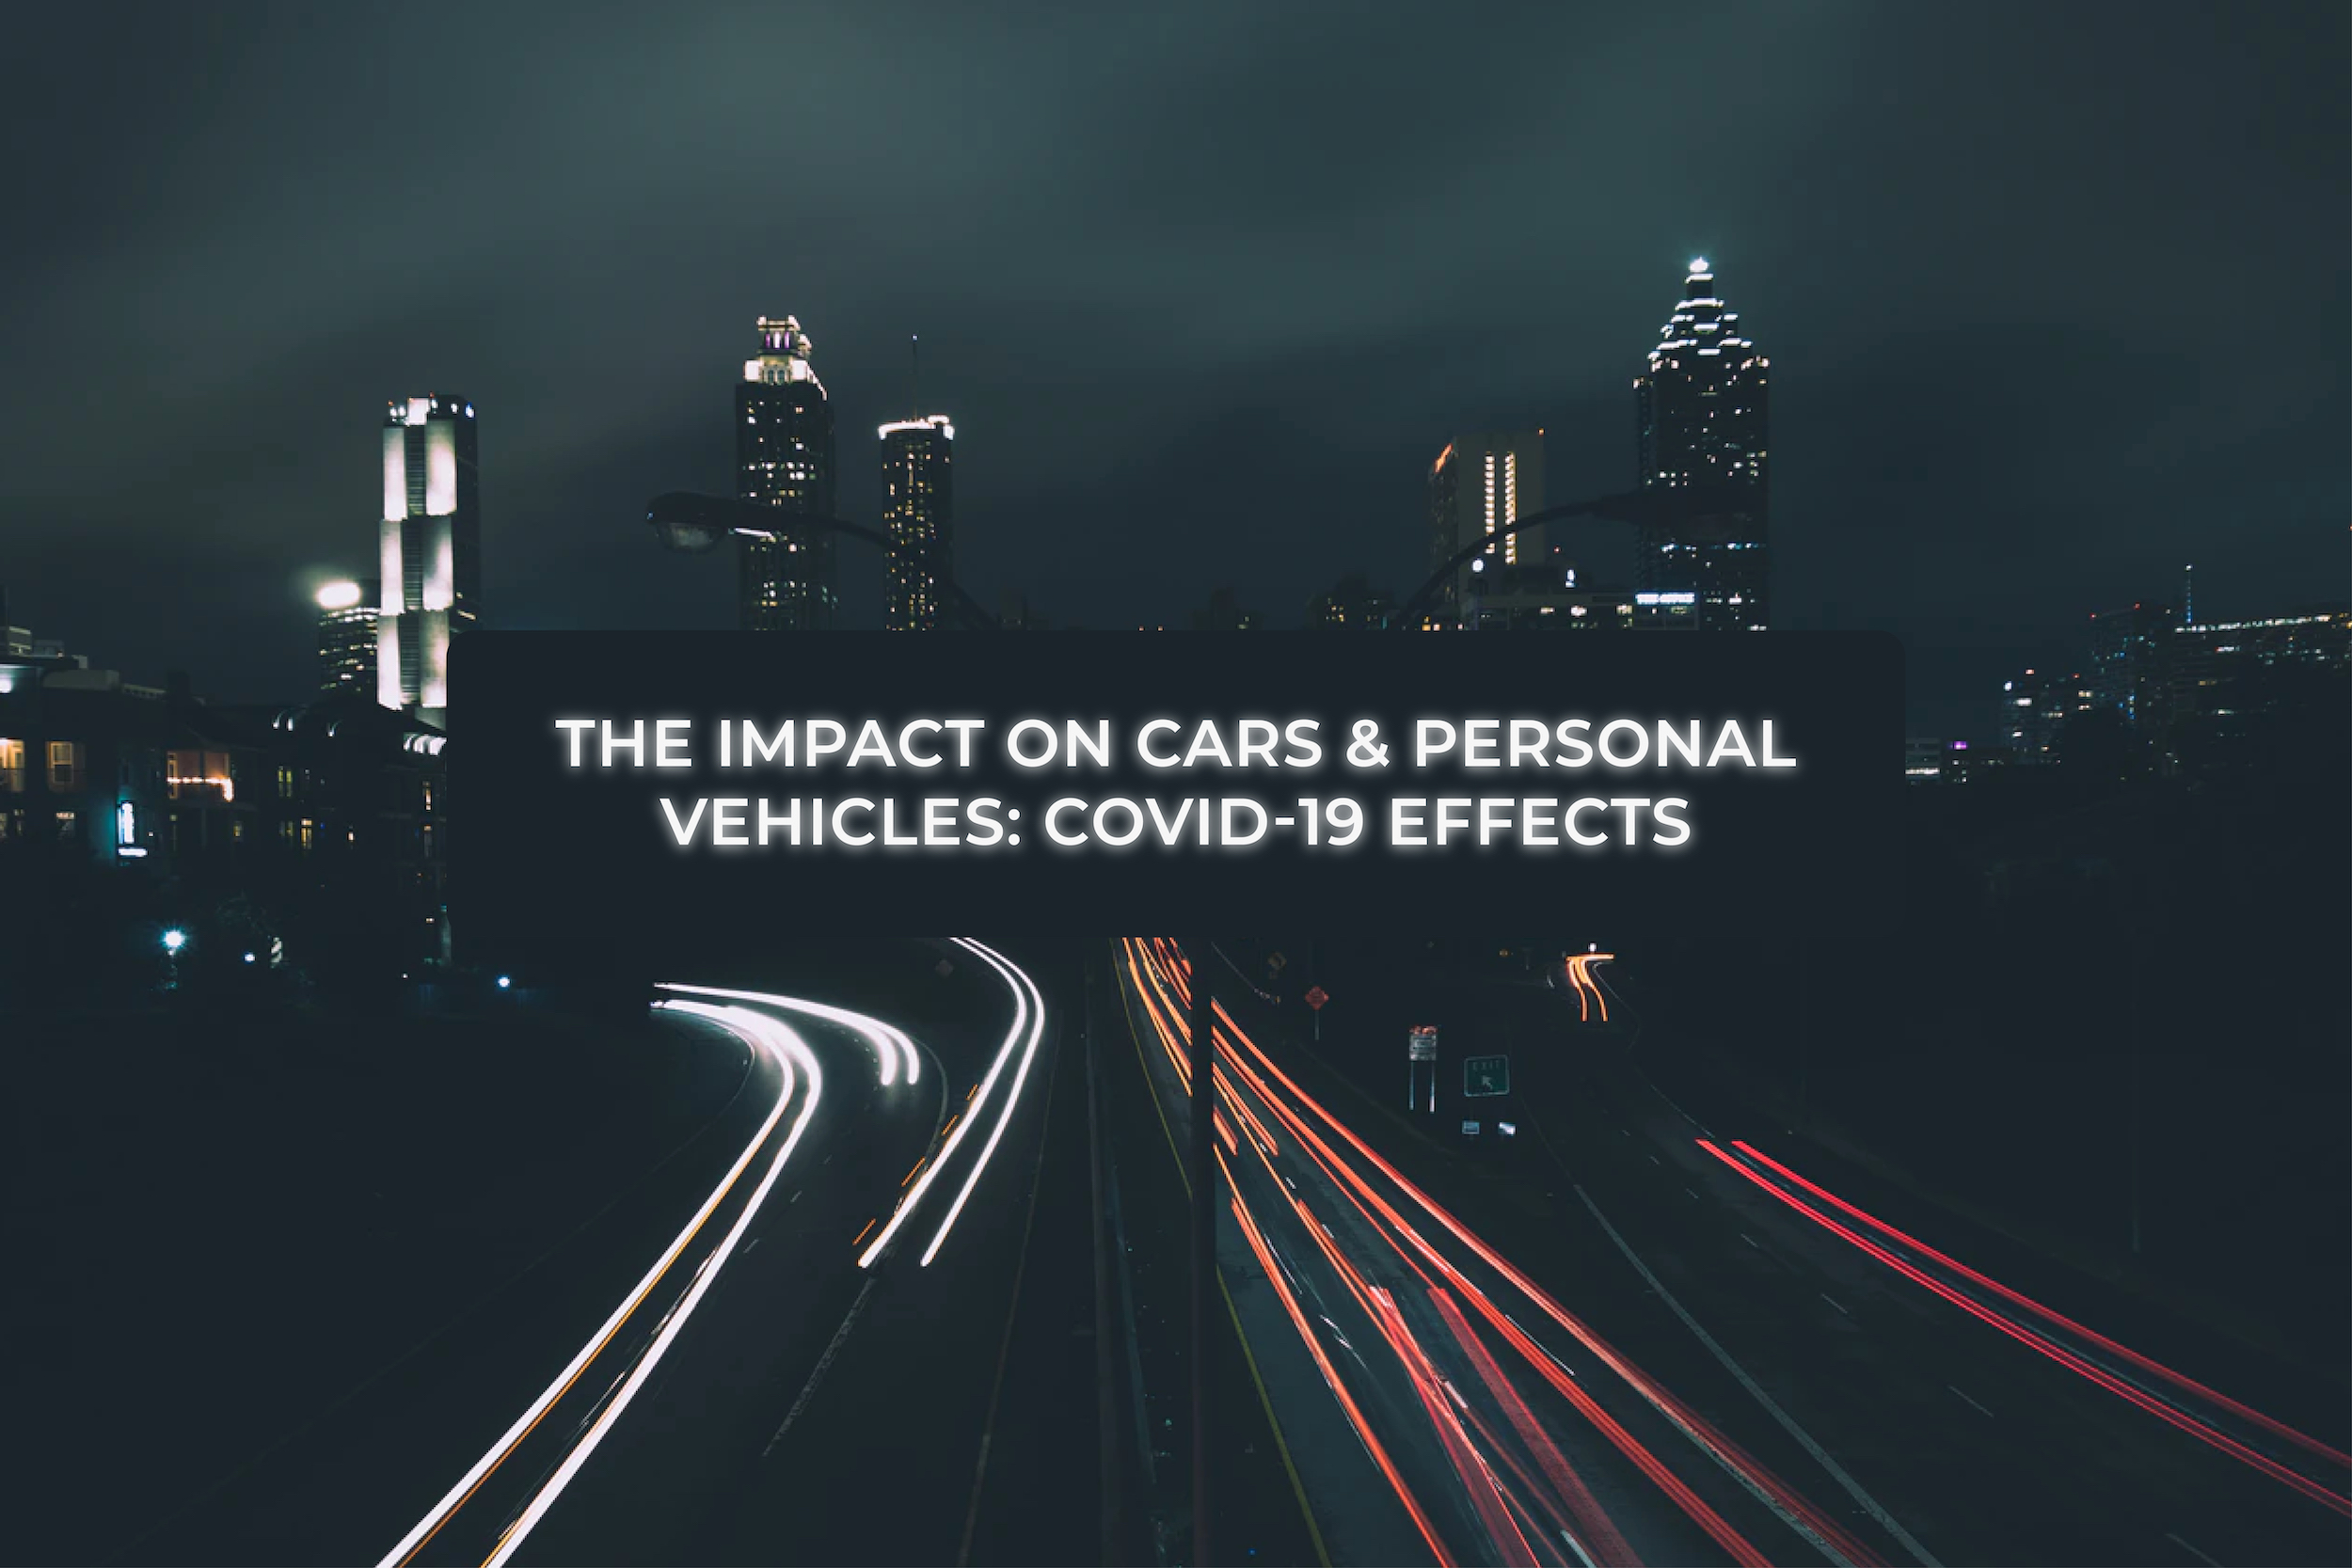 Personal vehicles have been evolving for years, but the pandemic continues to have an increasing impact on cars and technology.